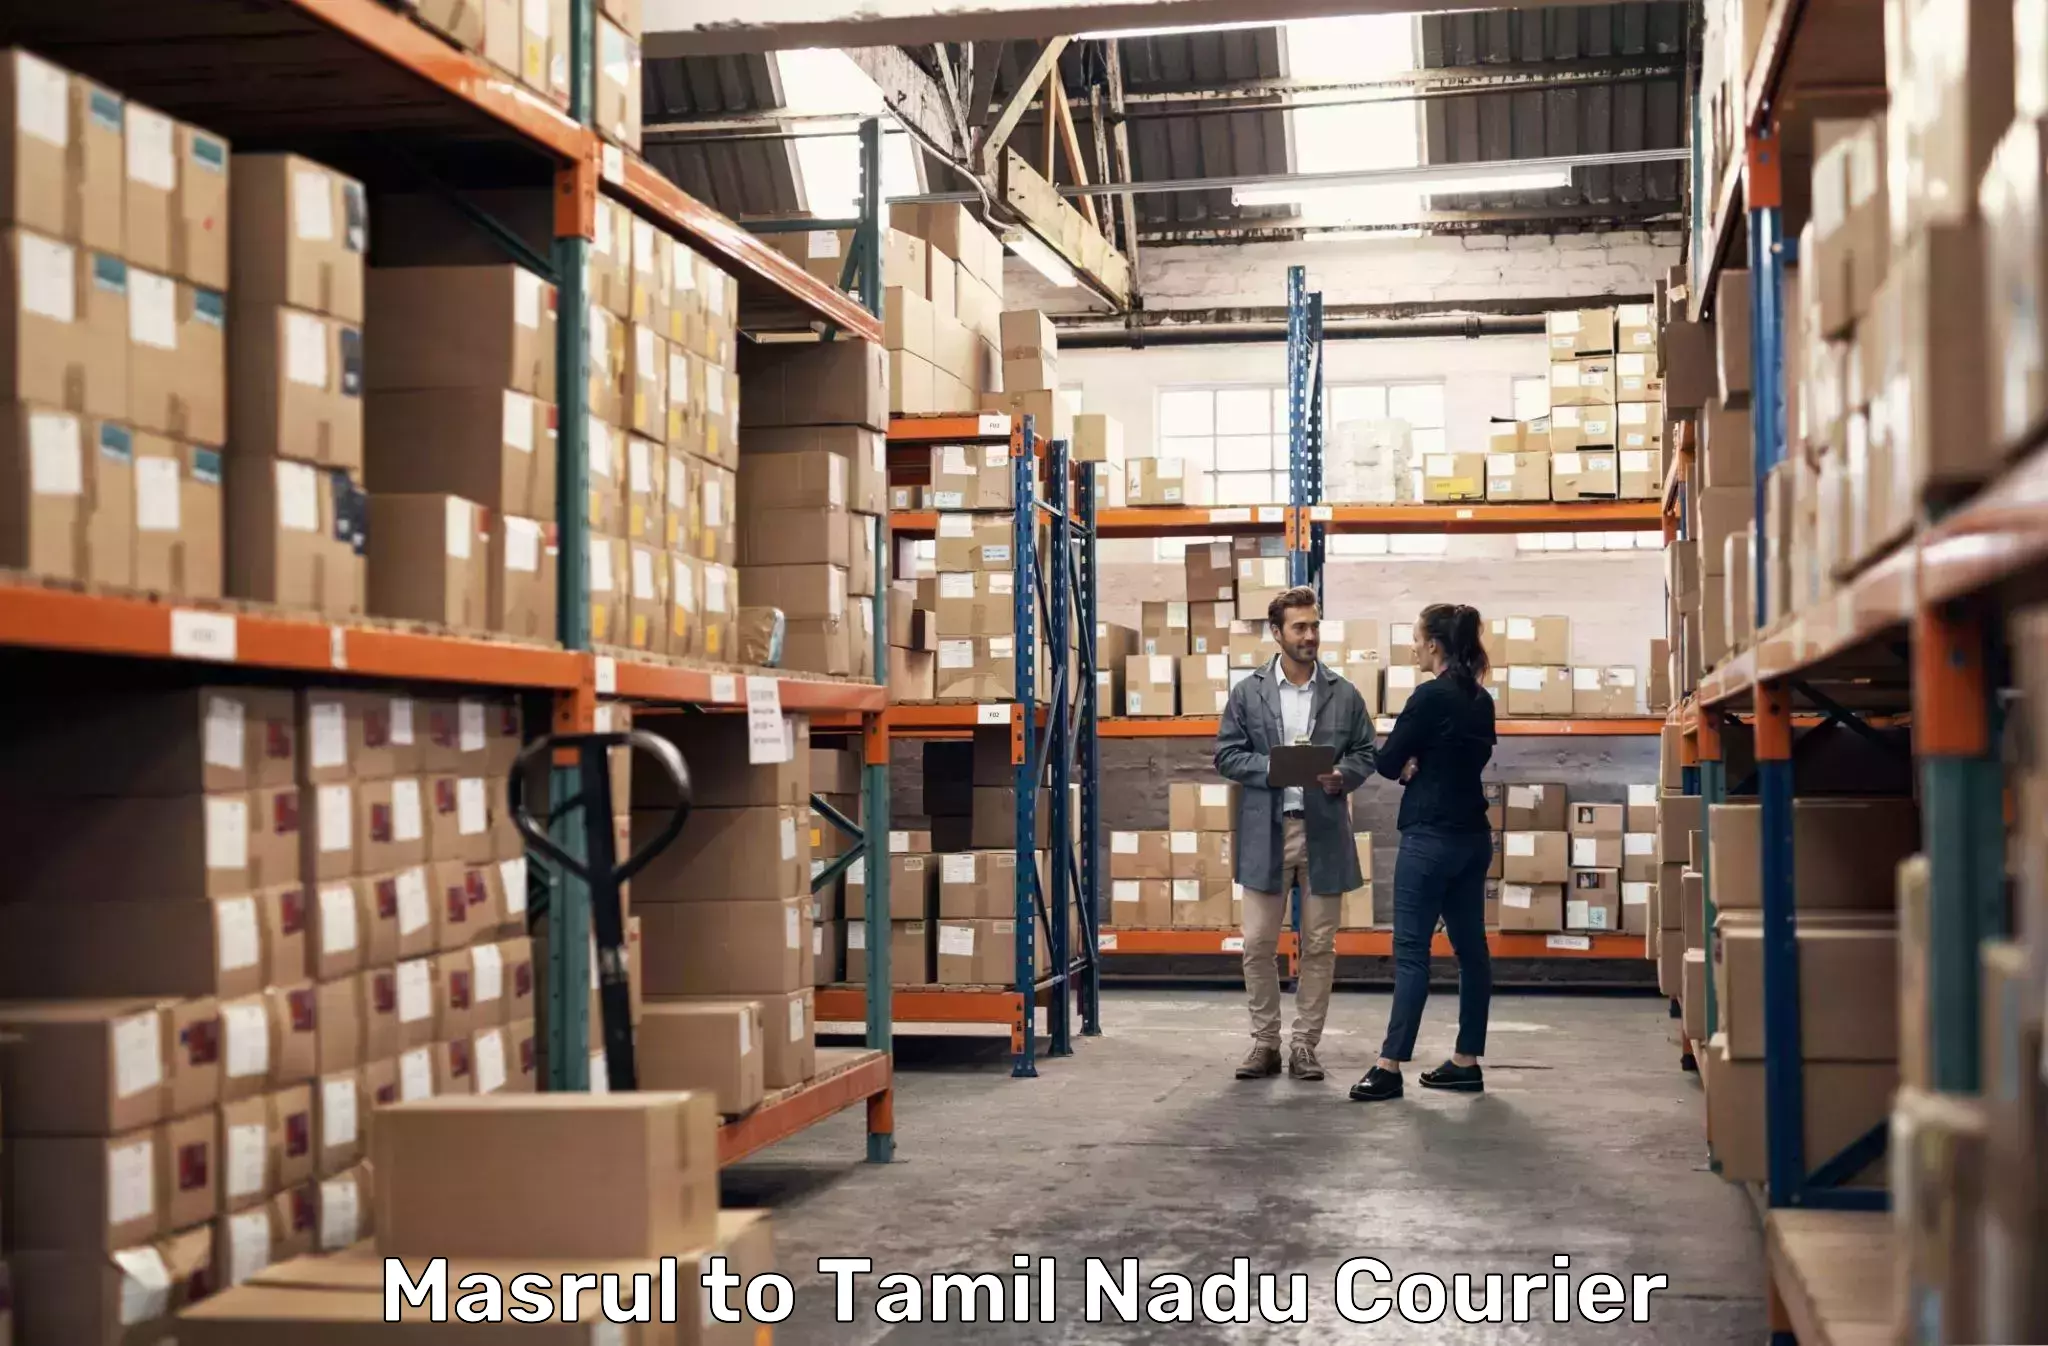 Reliable courier service Masrul to Vriddhachalam